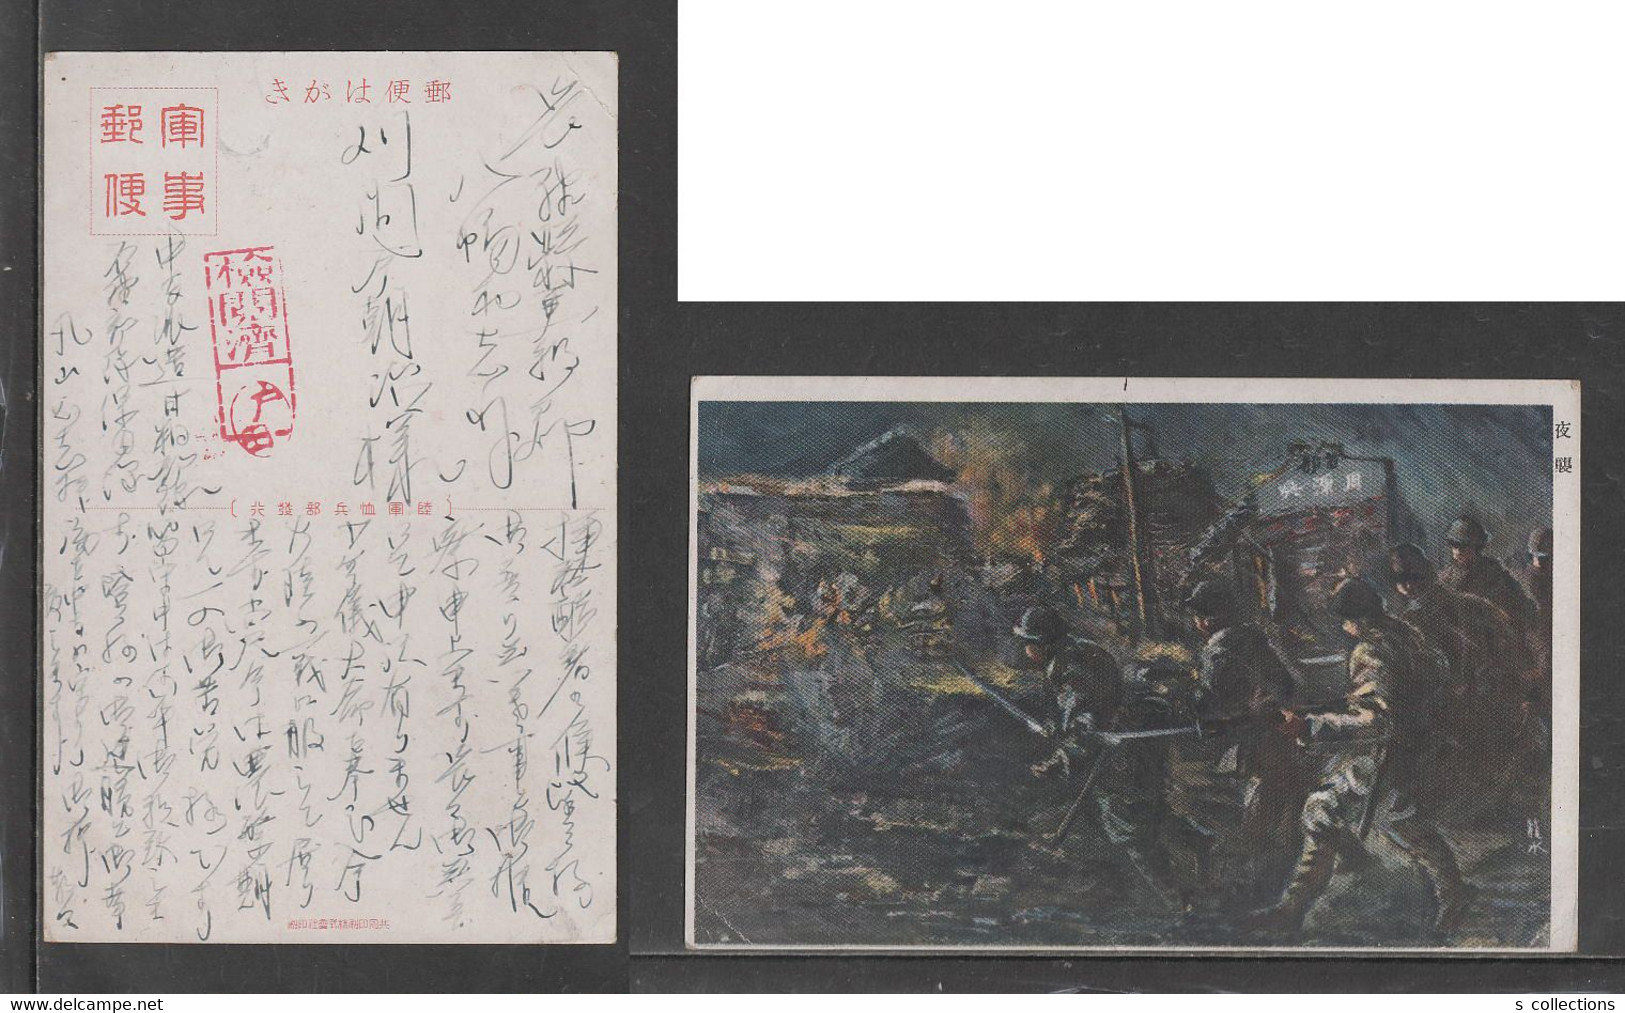 JAPAN WWII Military Picture Japanese Soldier Postcard CENTRAL CHINA WW2 MANCHURIA CHINE MANDCHOUKOUO JAPON GIAPPONE - 1943-45 Shanghai & Nanchino